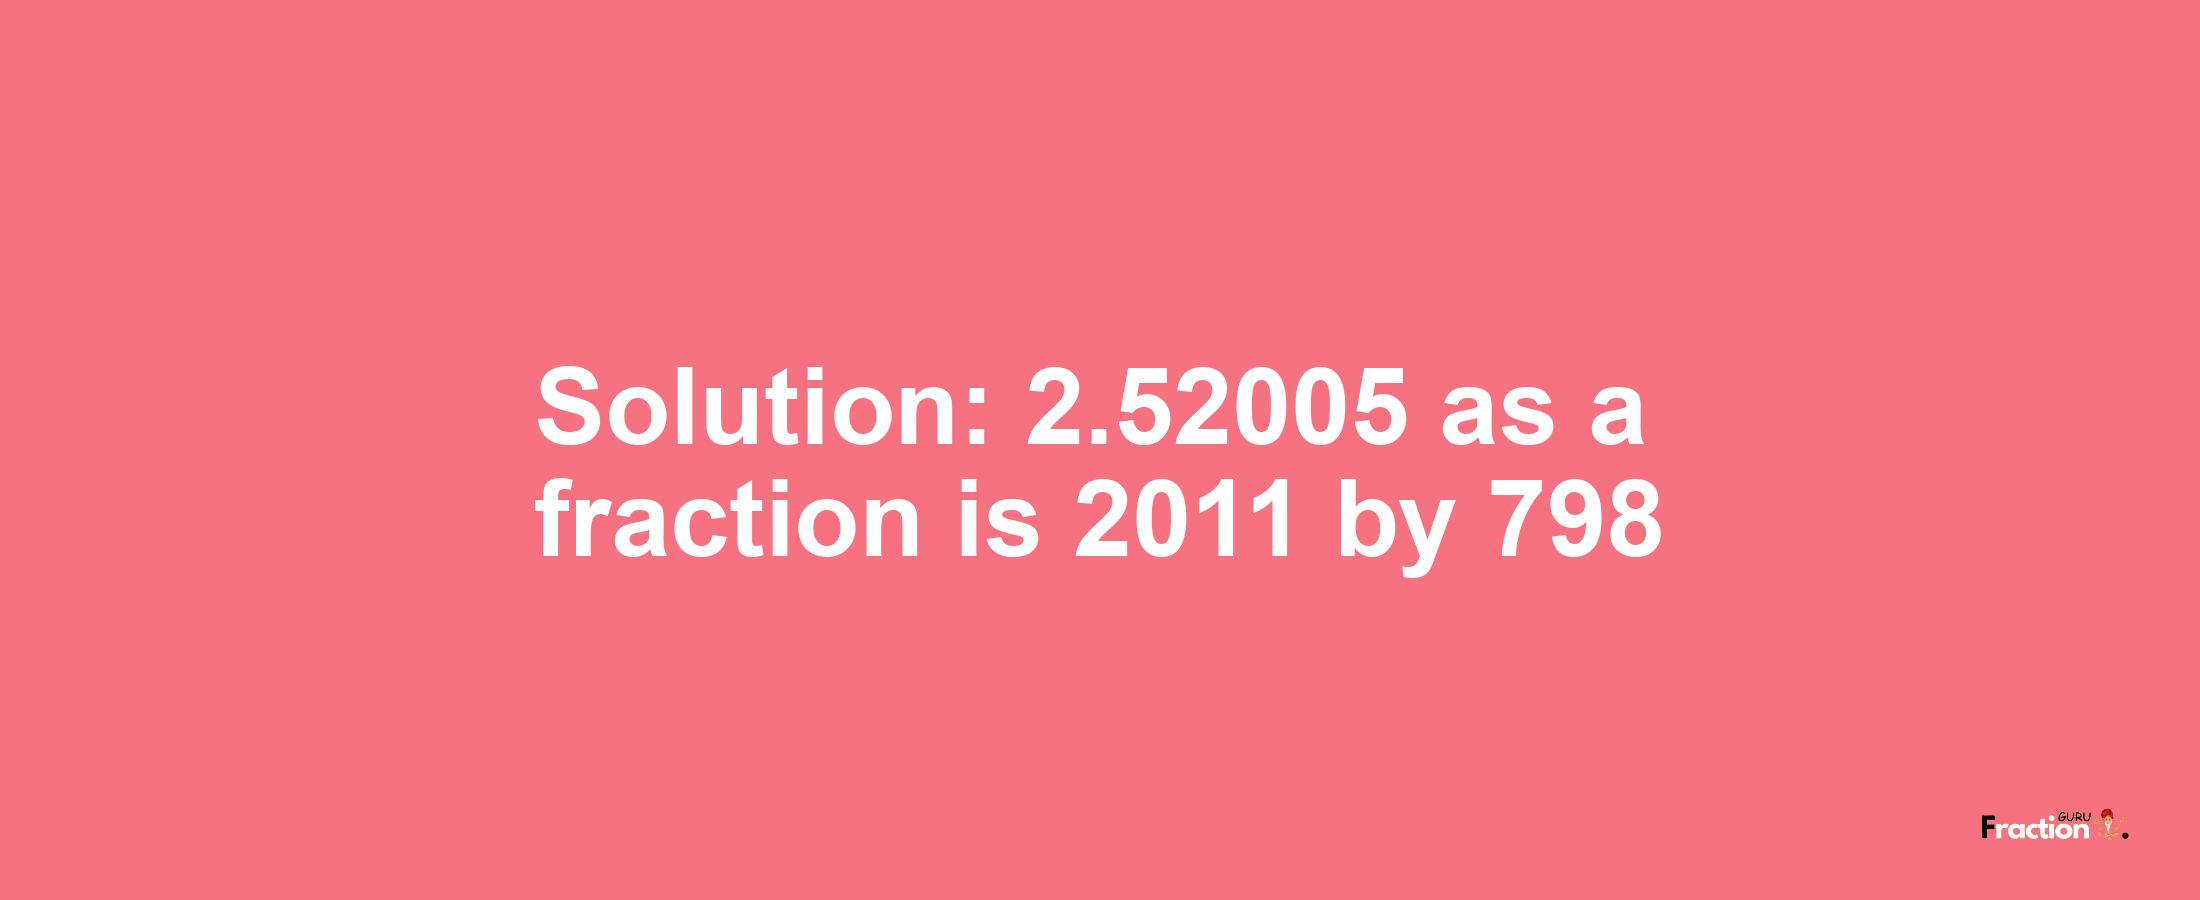 Solution:2.52005 as a fraction is 2011/798